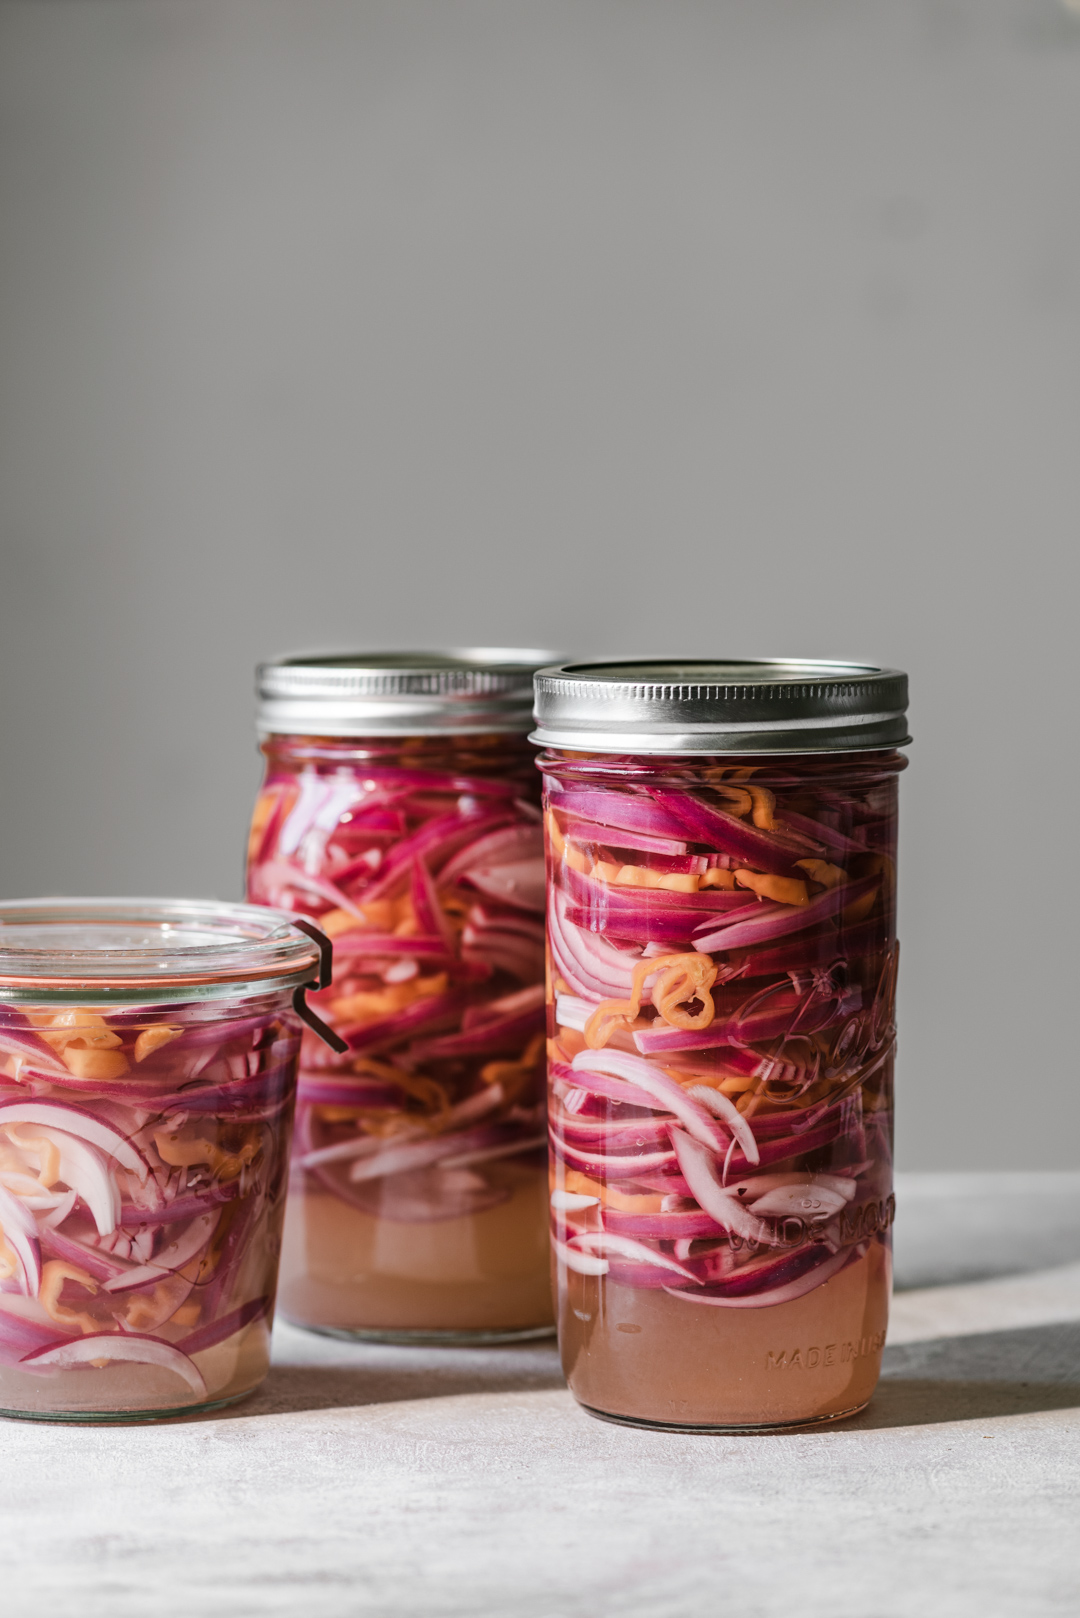 PICKLED RED ONIONS WITH HABANERO PEPPERS